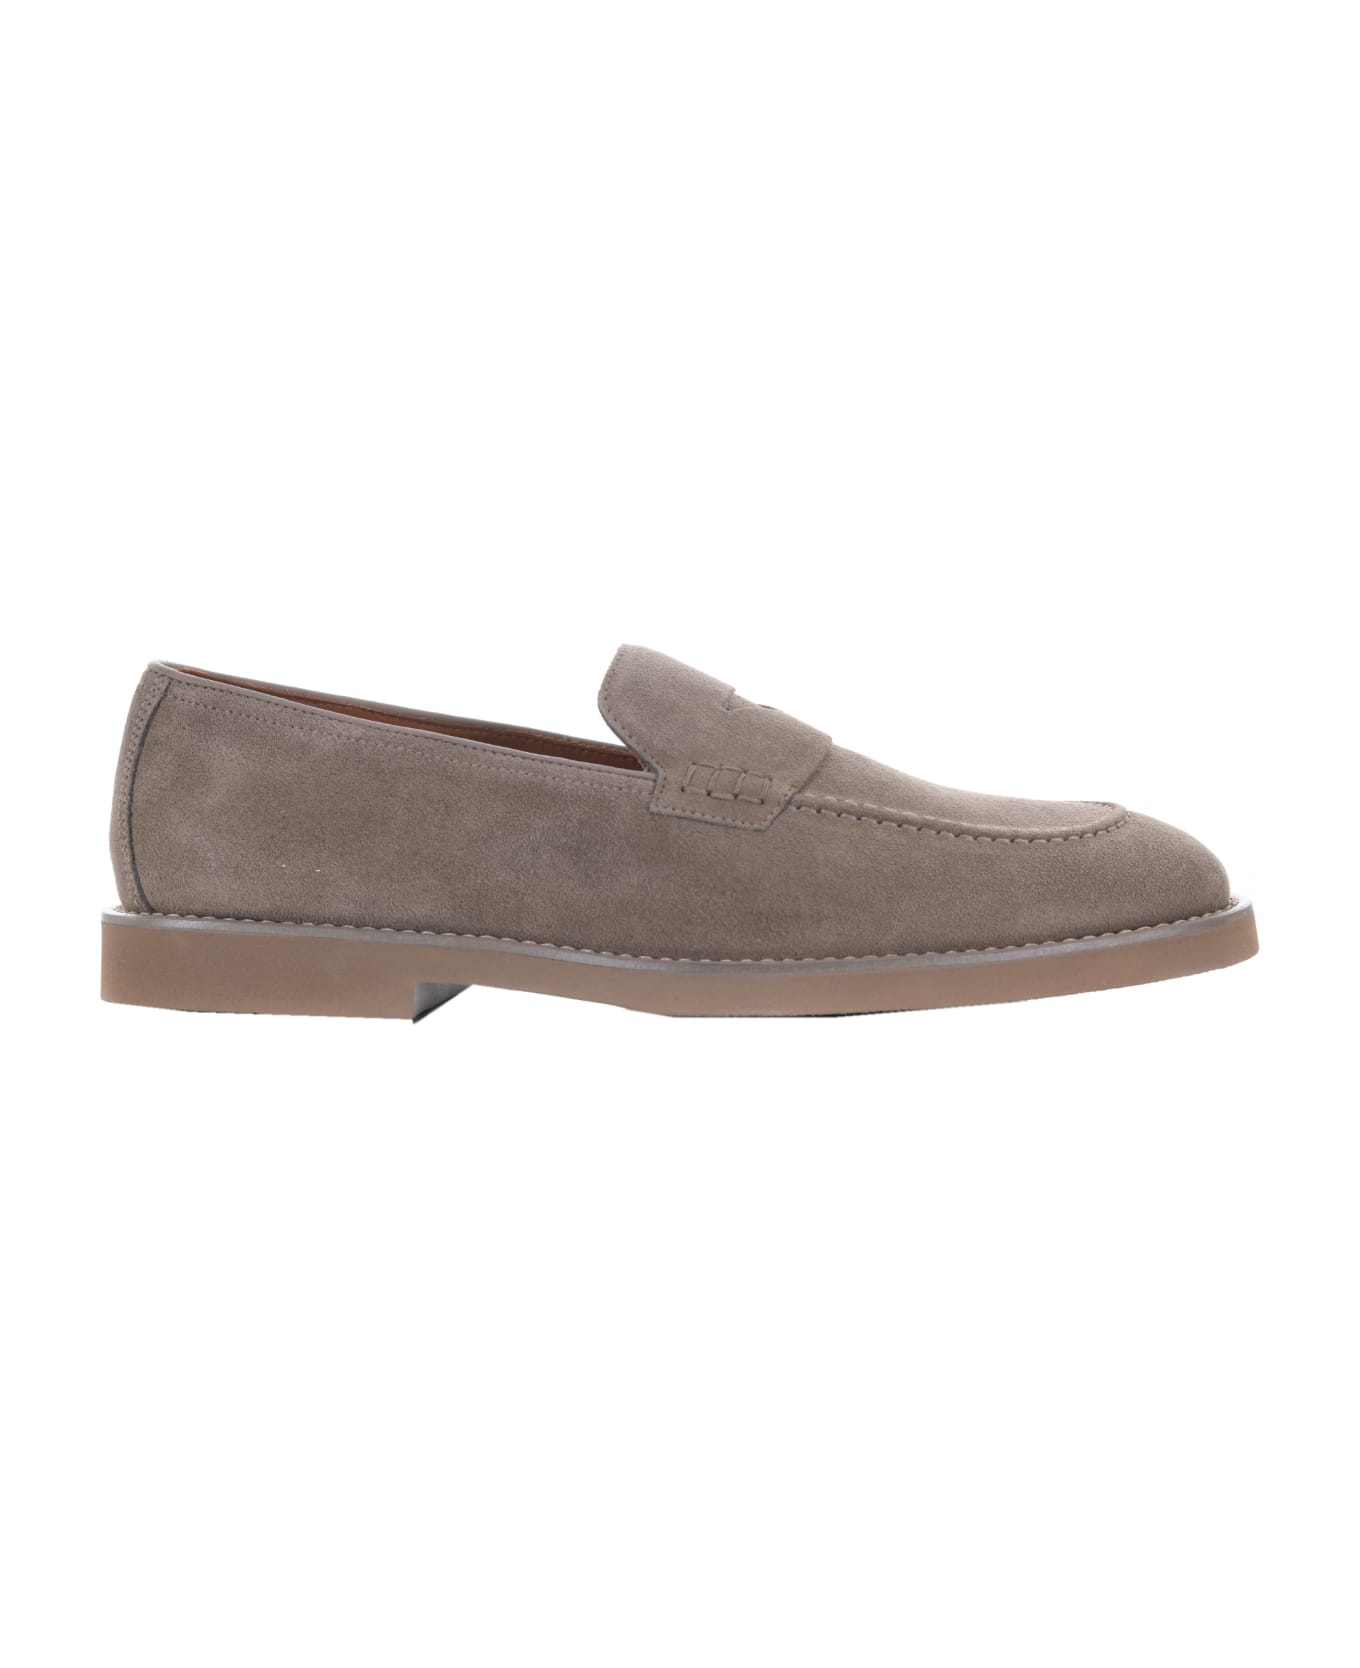 Doucal's Loafers - Tortora